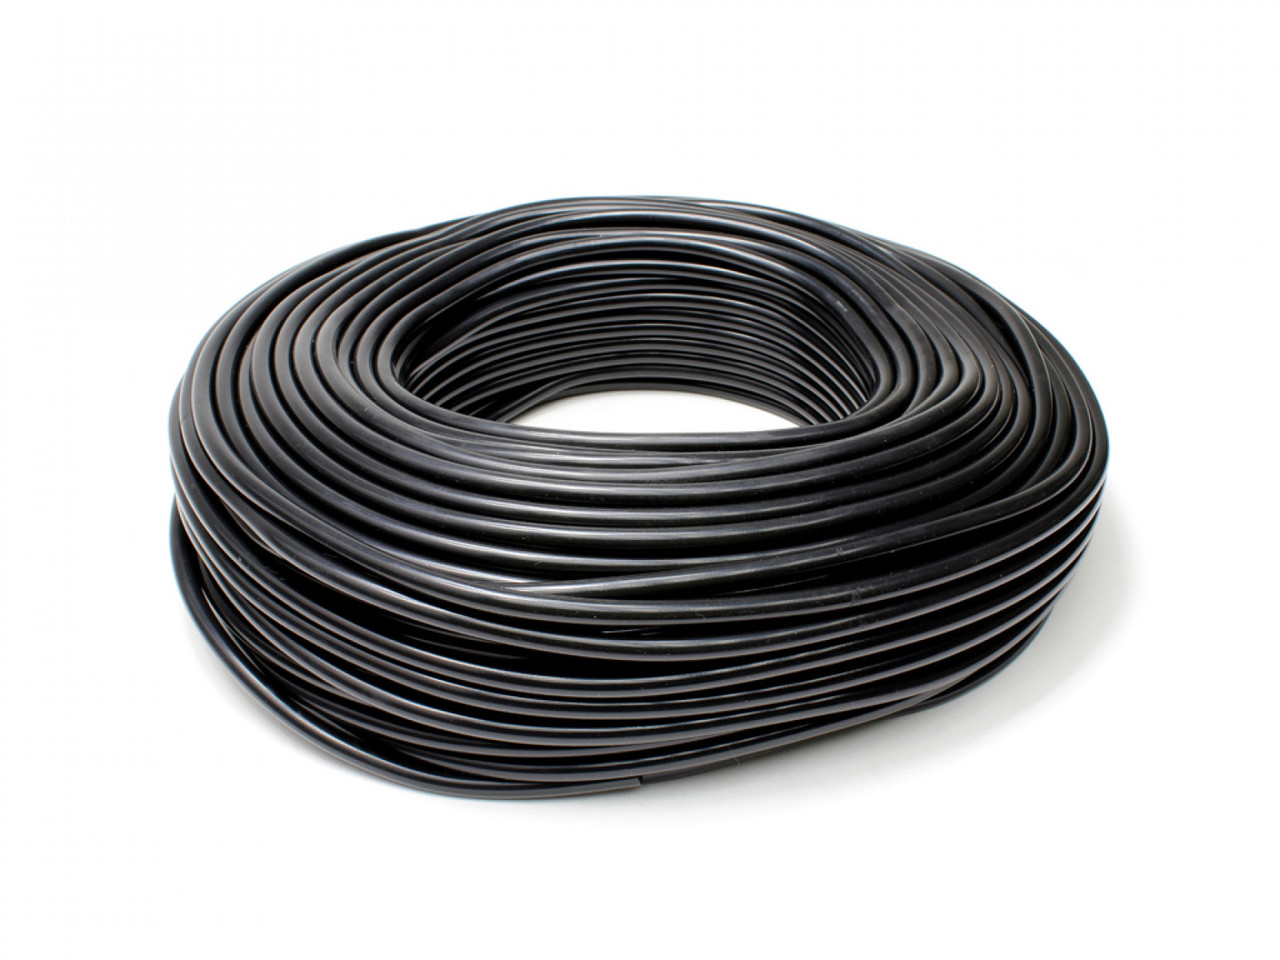 HPS 1/8" (3mm) ID Black High Temp Silicone Vacuum Hose w/ 1.5mm Wall Thickness - 50 Feet Pack (HPS-HTSVH3TW-BLKx50)